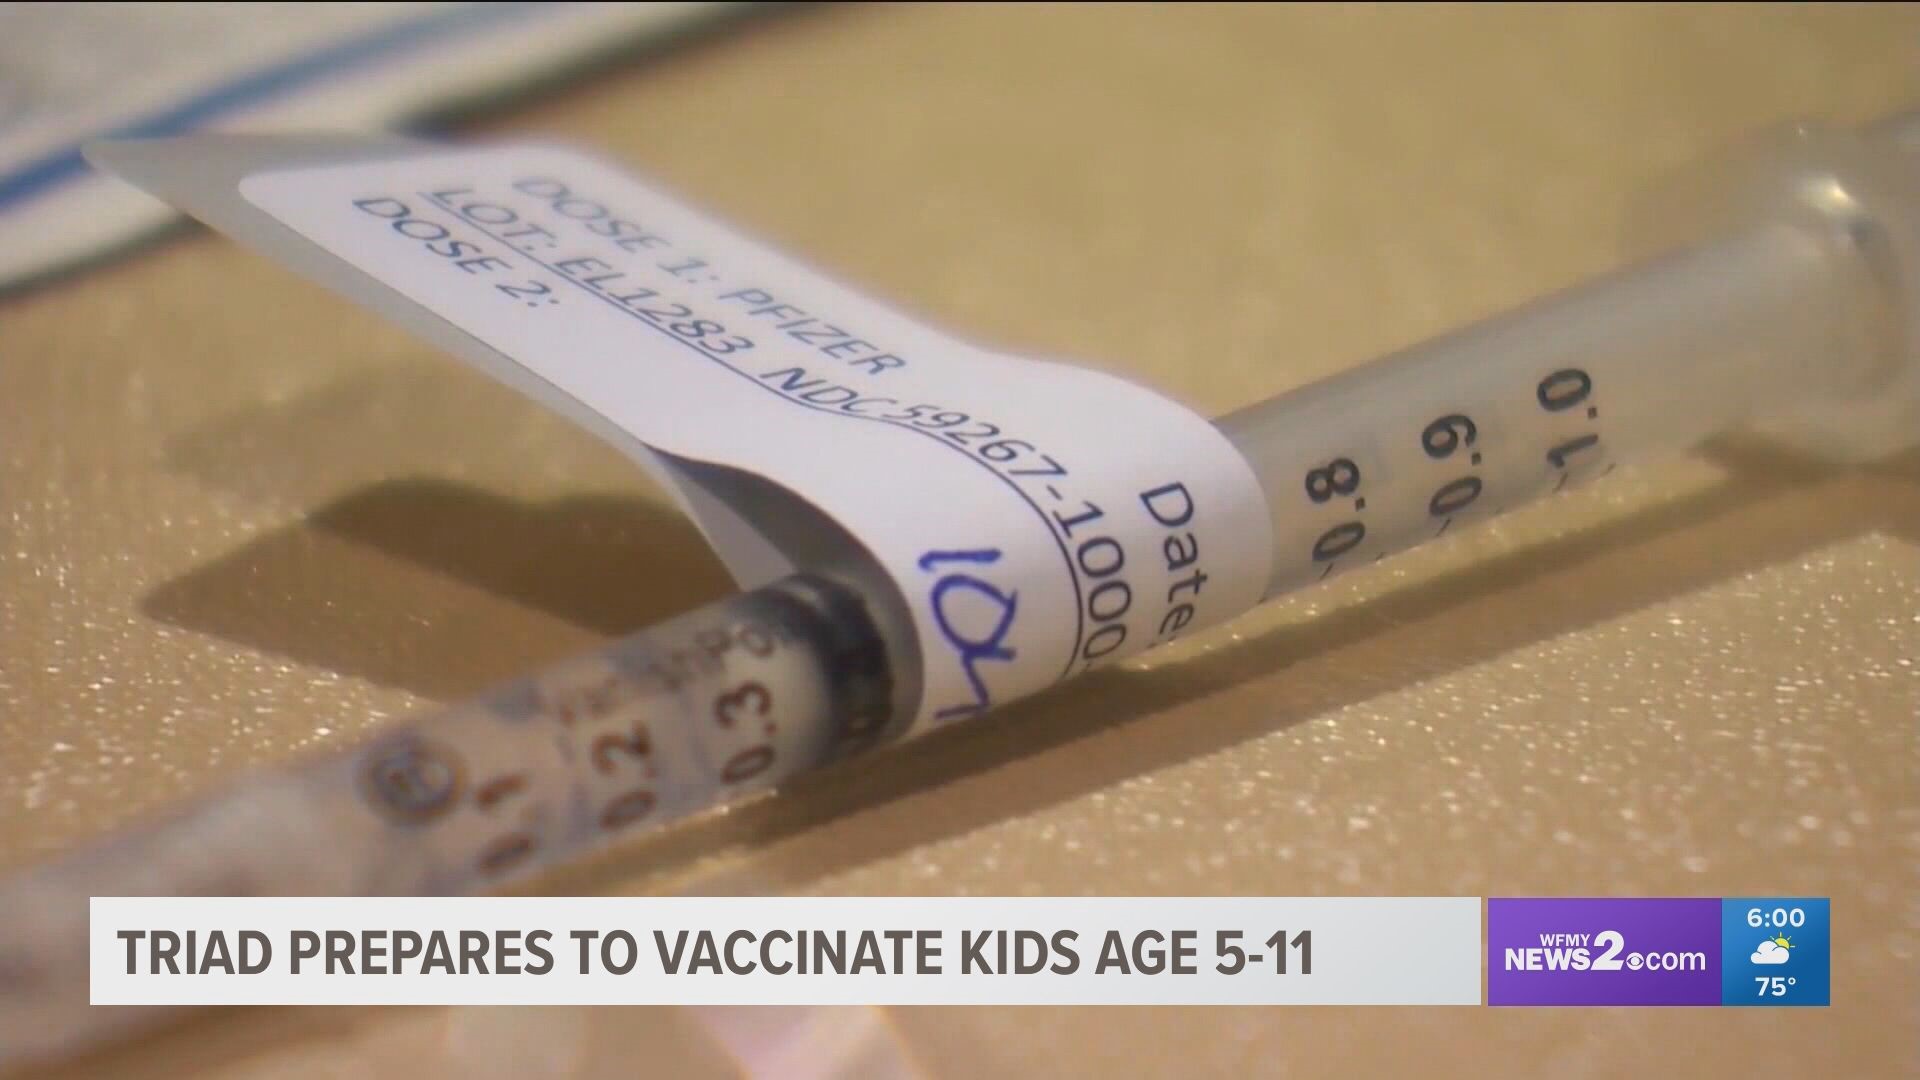 Two Triad school districts are shedding light on their plans to vaccinate children ages 5 to 11.